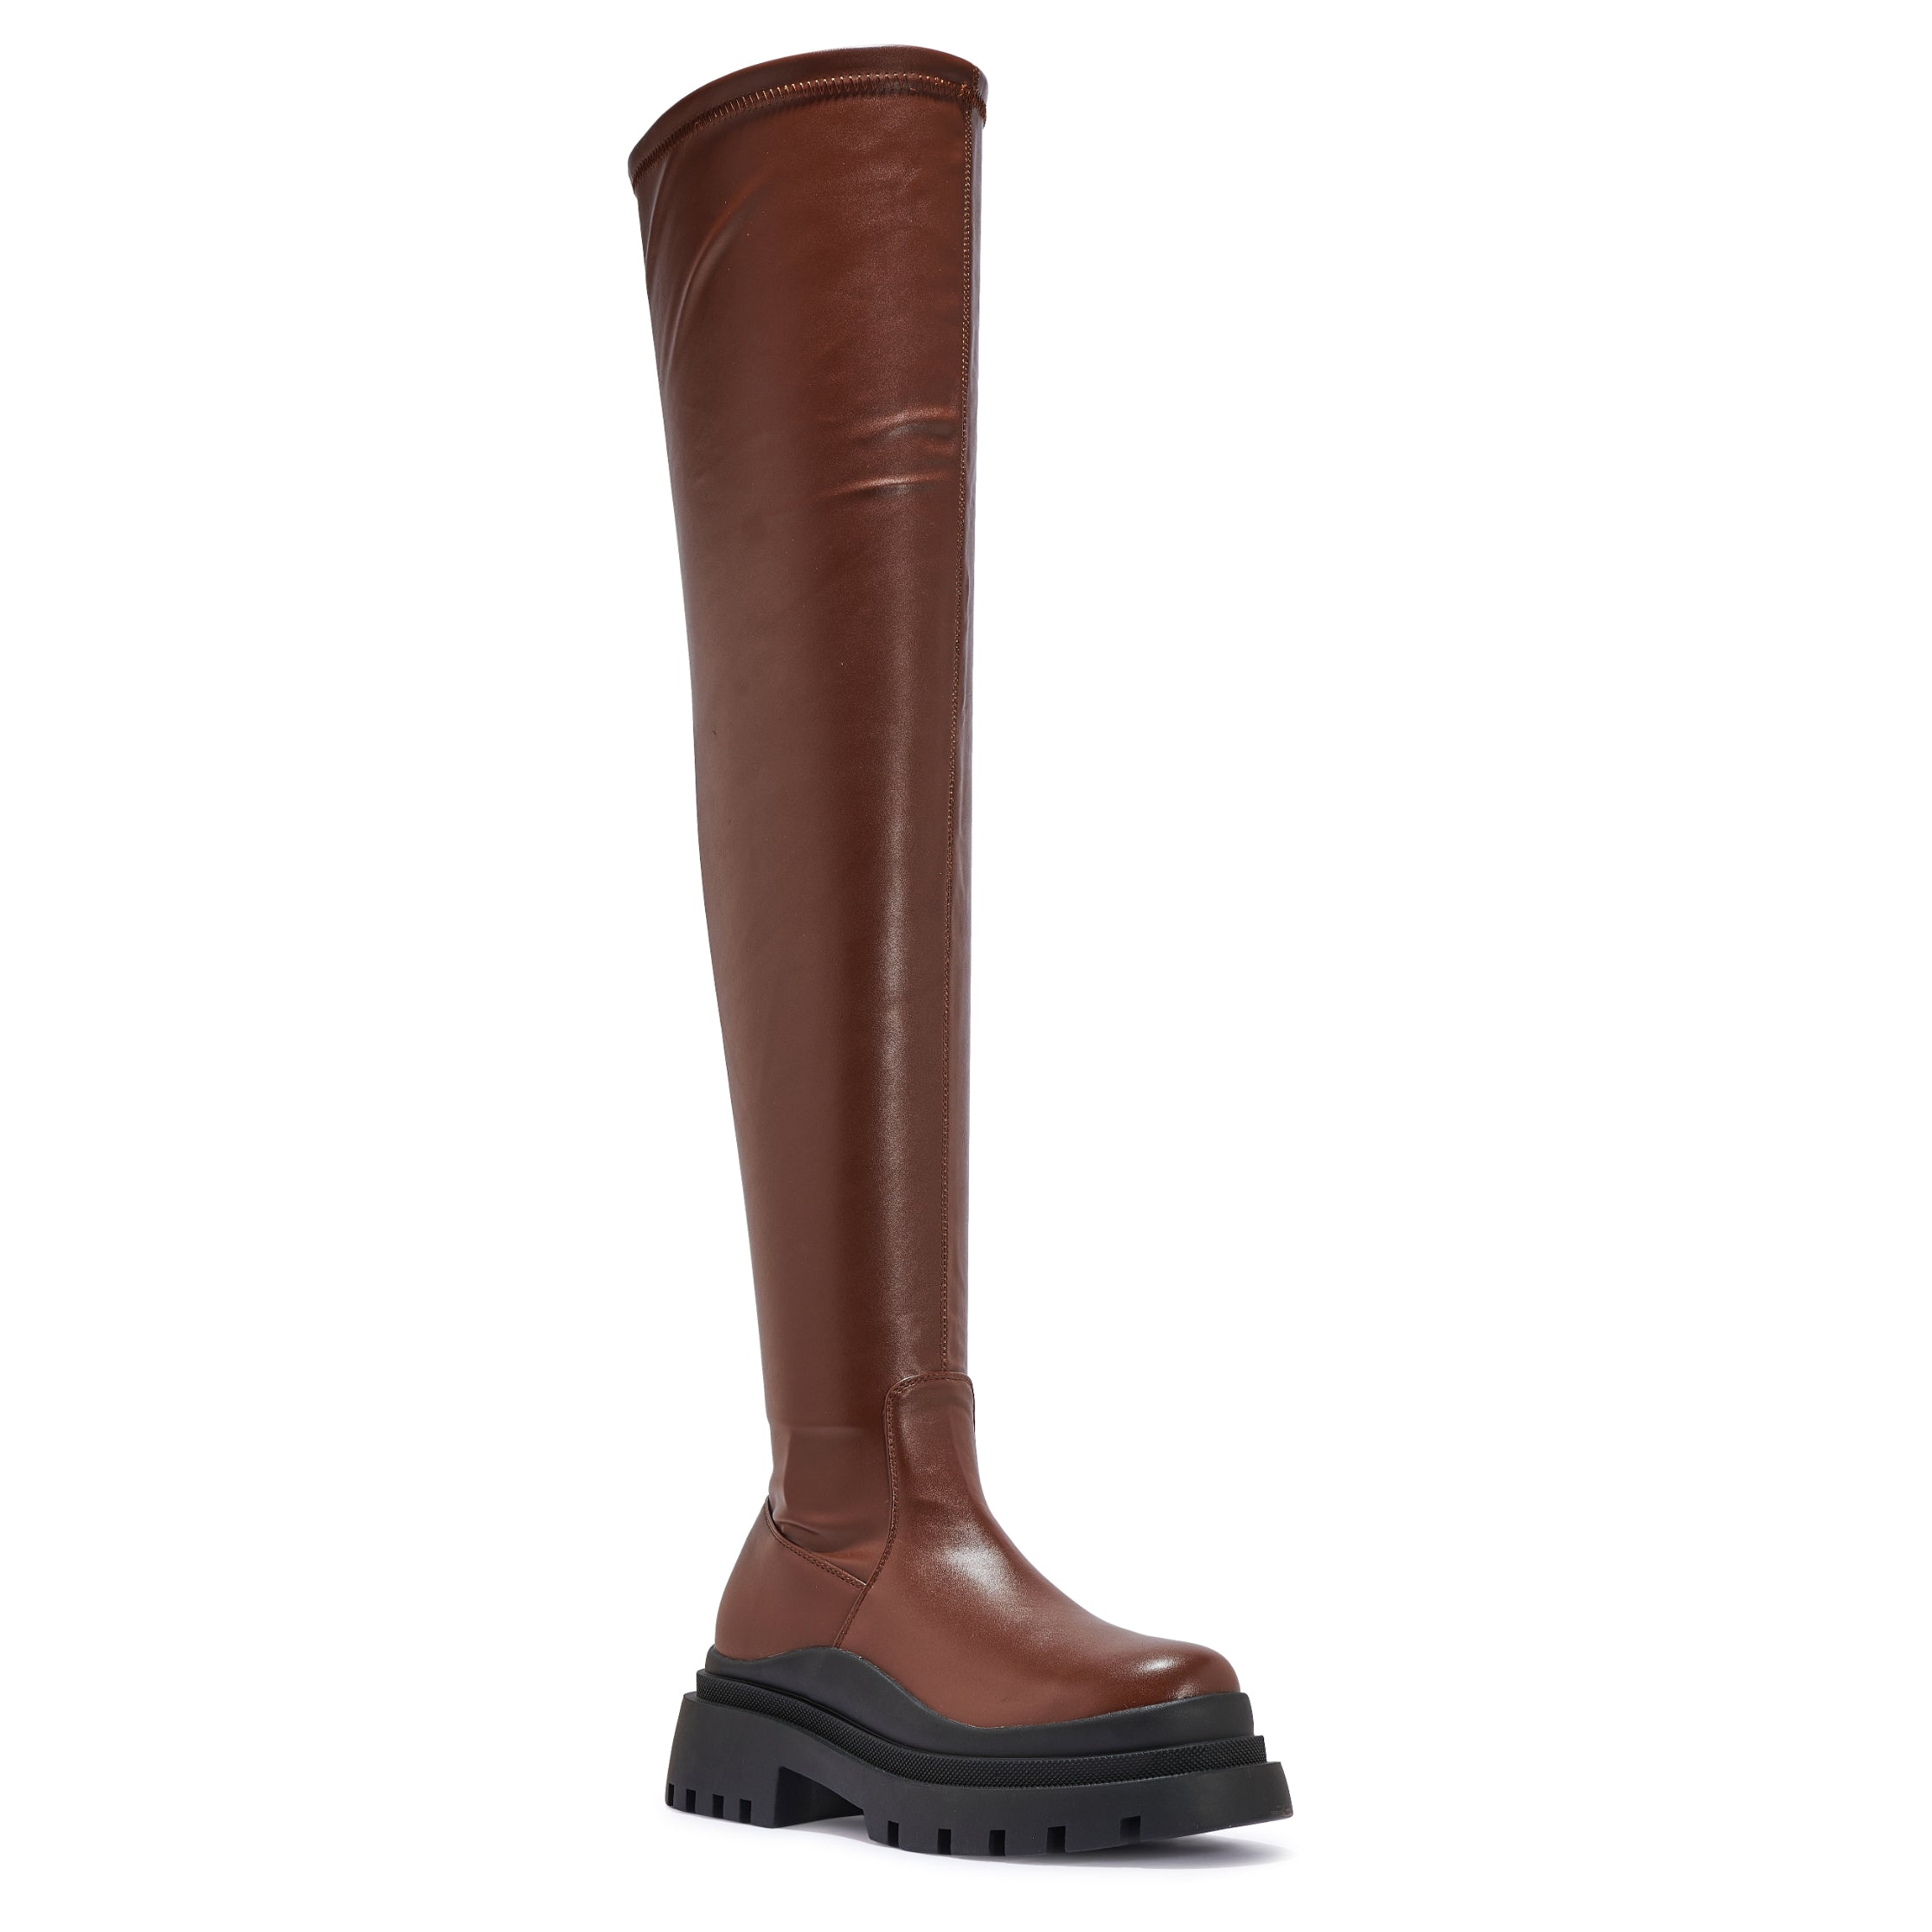 CHILLI4 - CHUNKY DOUBLE CLEATED SOLE KNEE HIGH BOOT